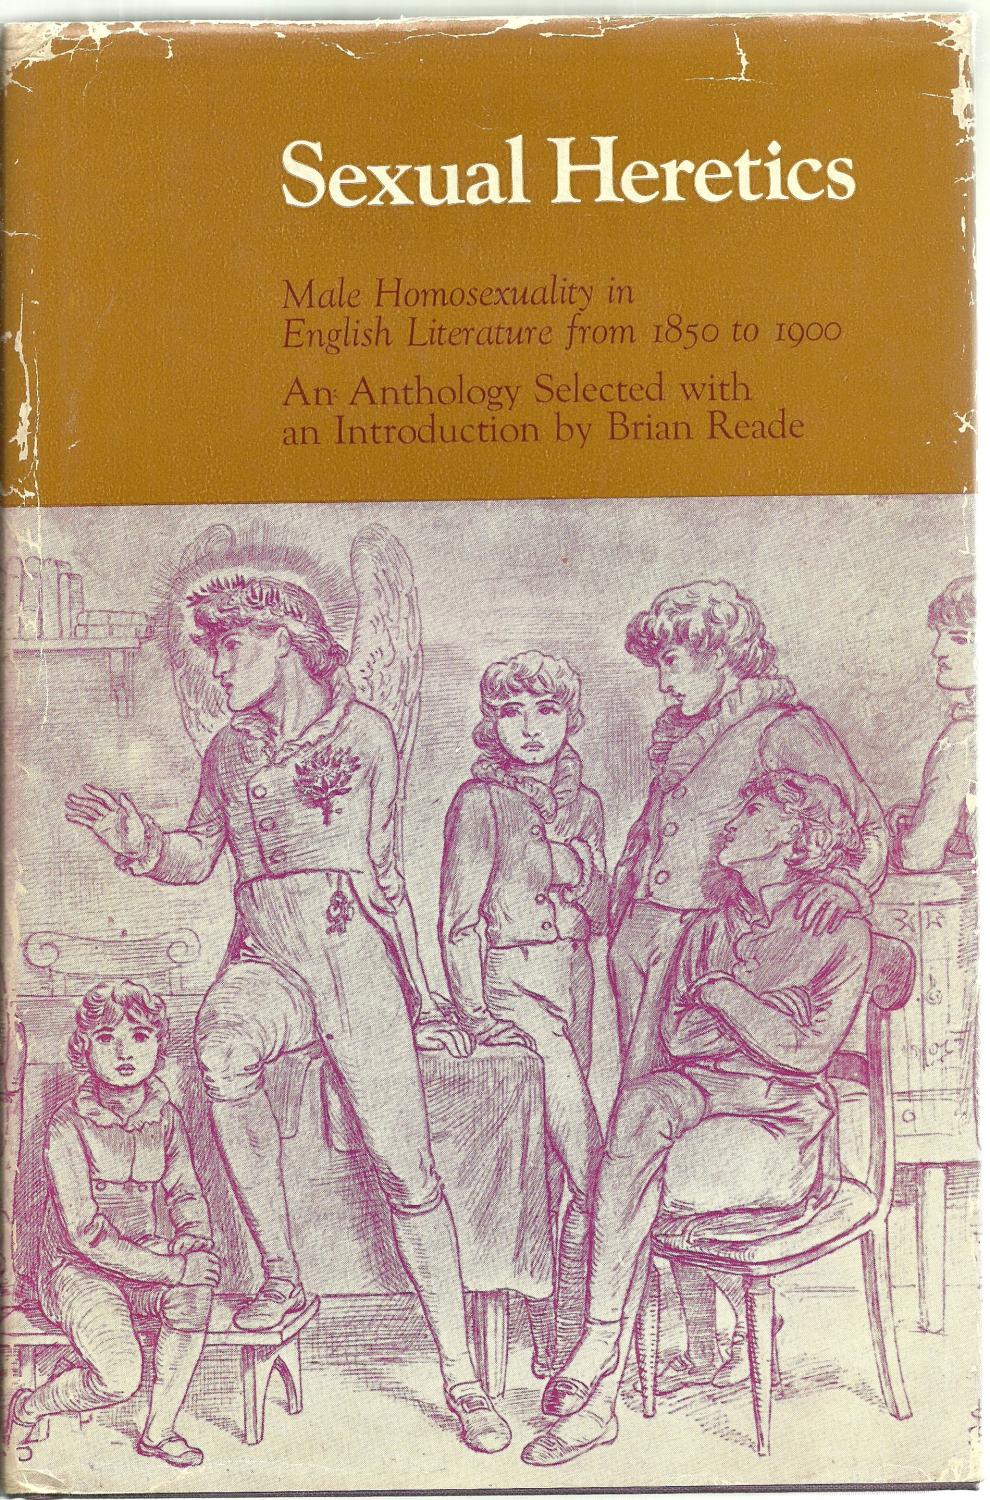 Sexual Heretics: Male Homosexuality in English Literature from 1850 to 1900.